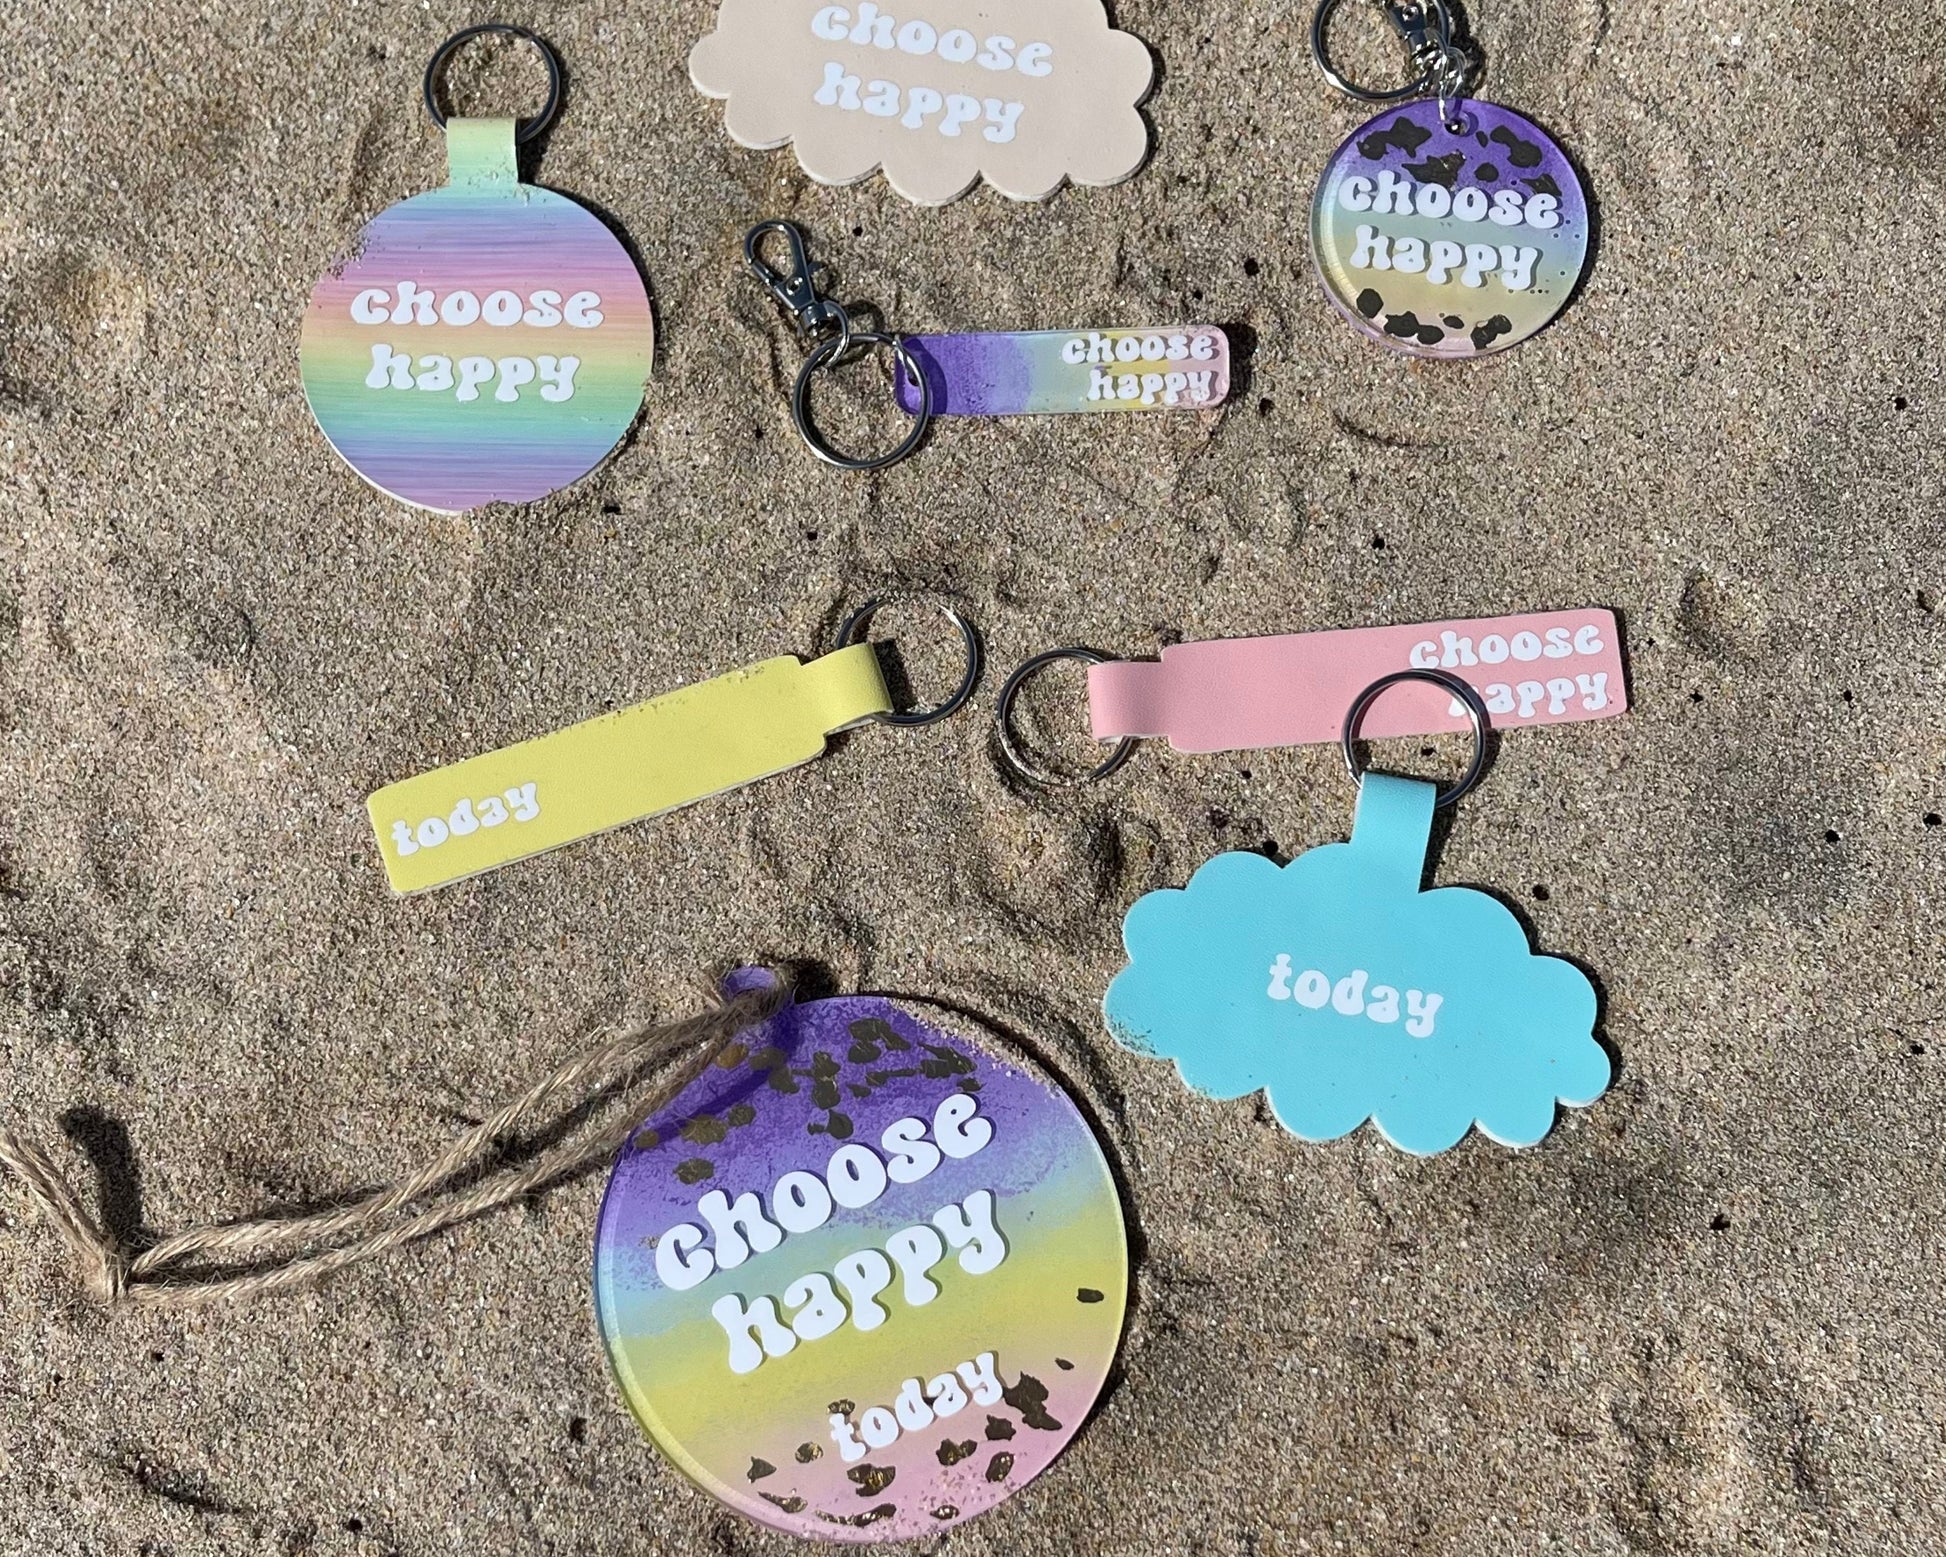 Choose Happy Today Motivational Keyrings, Hand Painted Light Weight Acrylic Keychain Accessory, Self Care Inspirational Quotes, Rainbow Gift